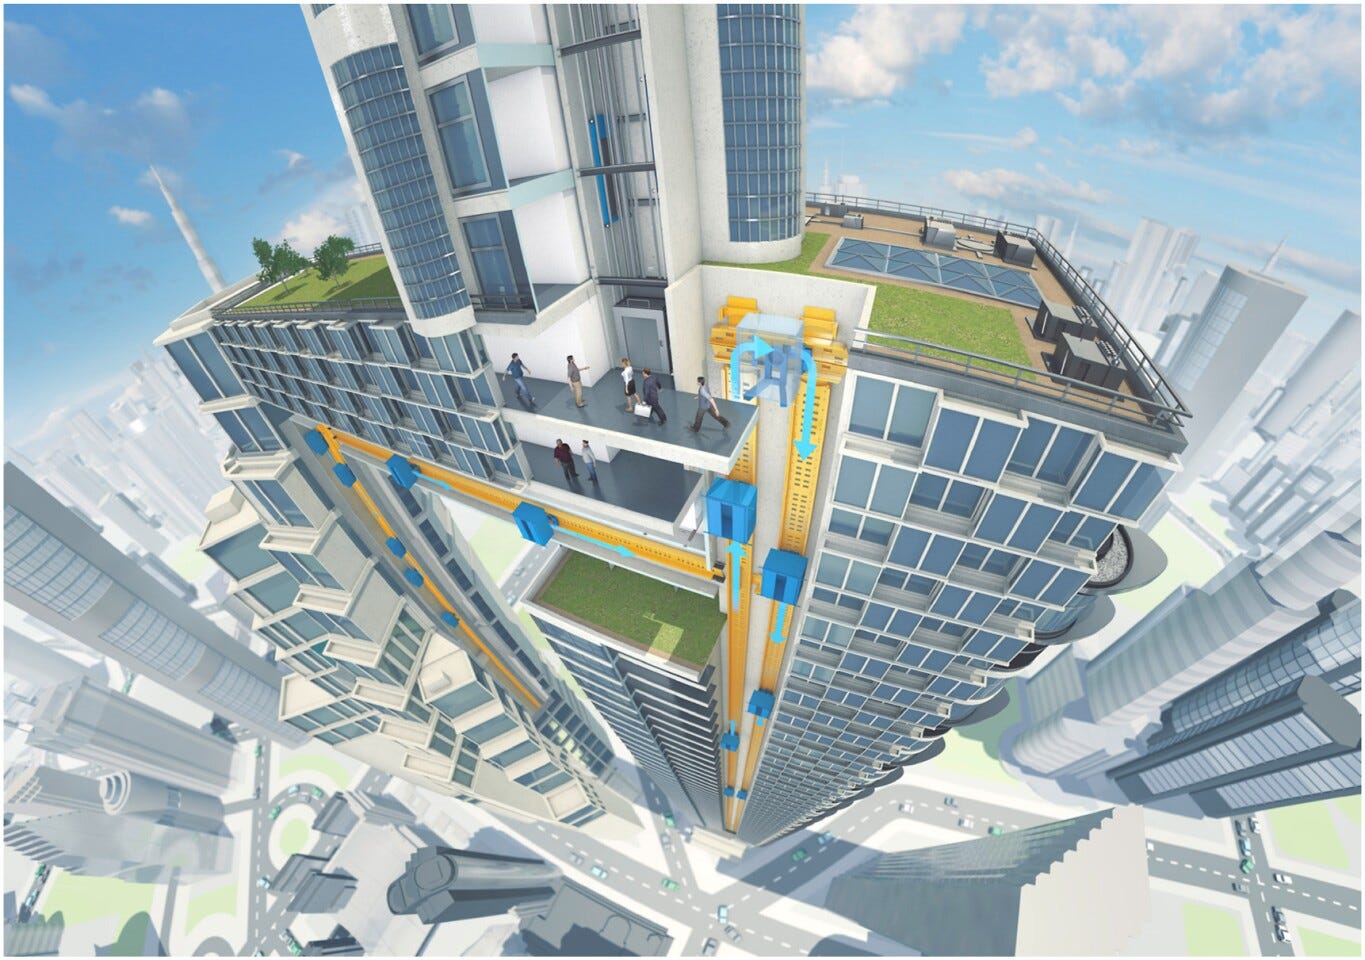 The Lift Energy Storage System would turn skyscrapers into giant gravity batteries, and would work even more efficiently if paired with next-level cable-free magnetic elevator systems like Thyssenkrupp's Multi-elevator, pictured above